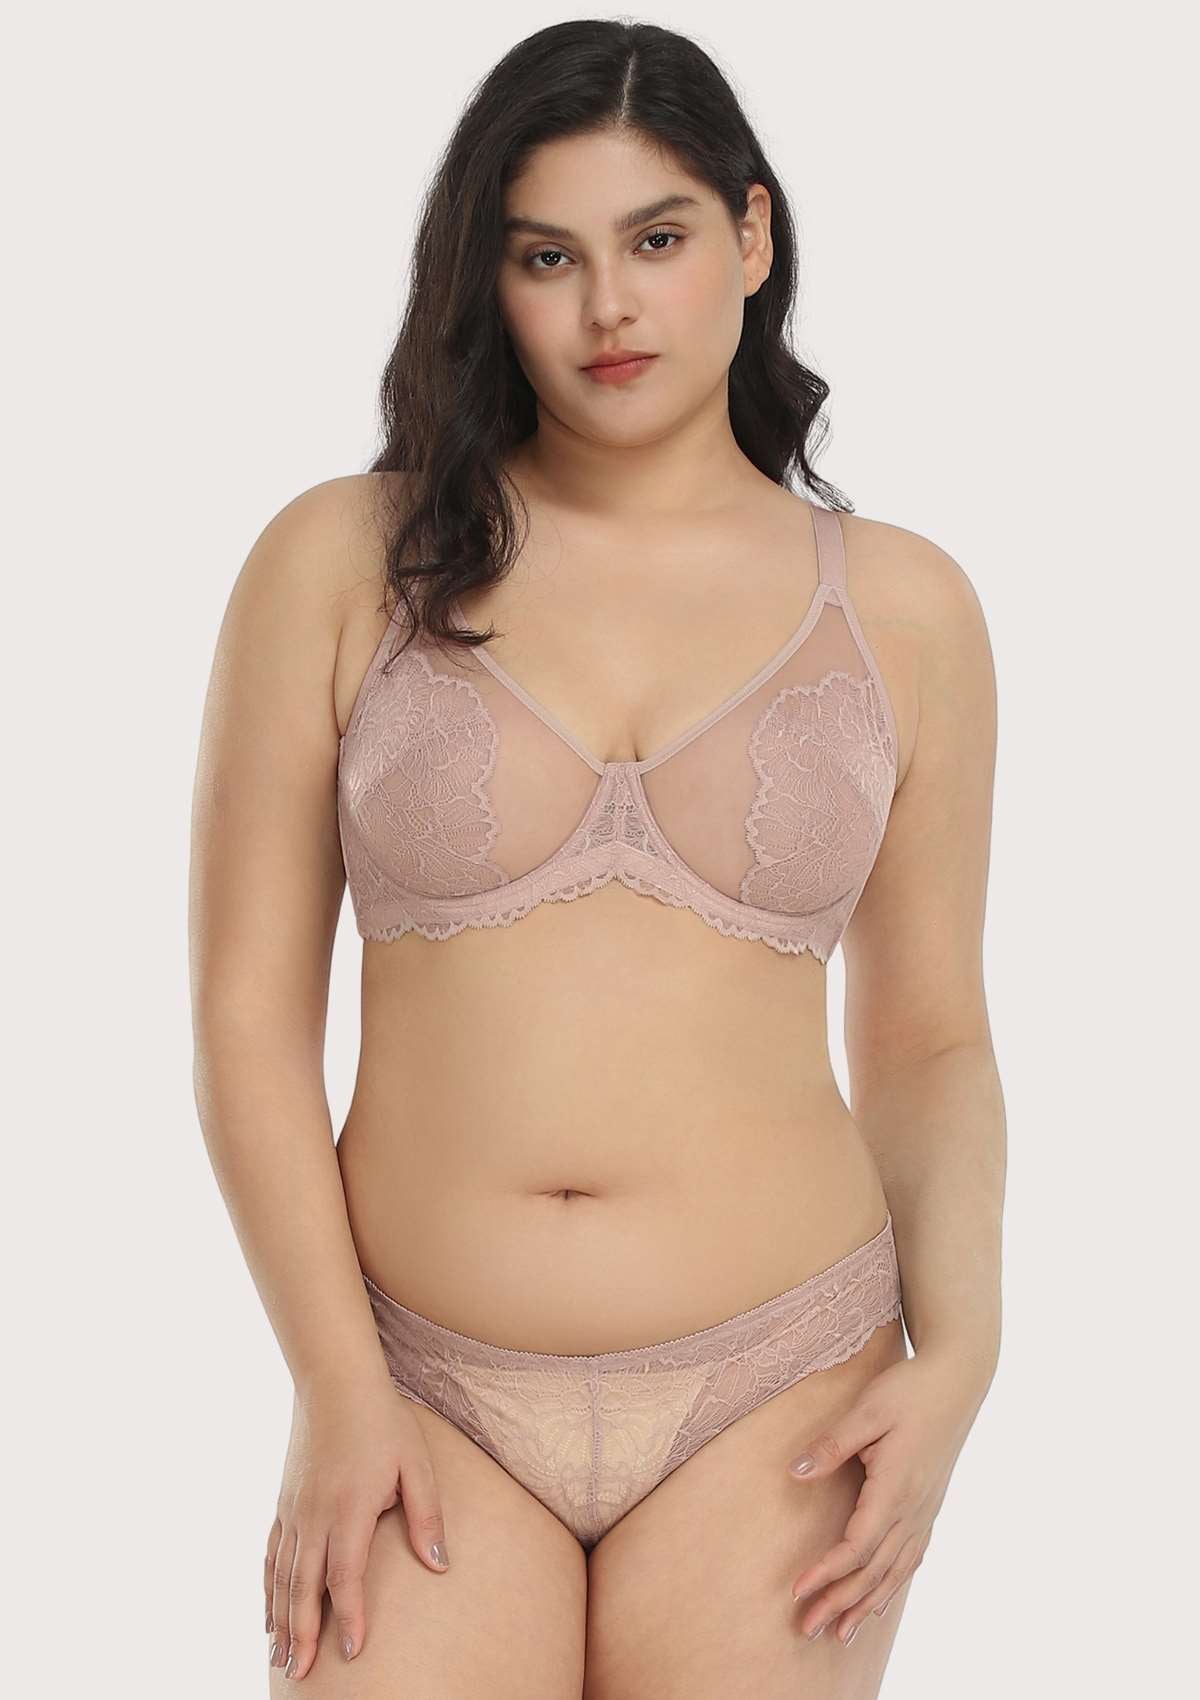 HSIA Blossom Lace Bra And Panties Set: Best Bra For Large Busts - Dark Pink / 34 / DD/E